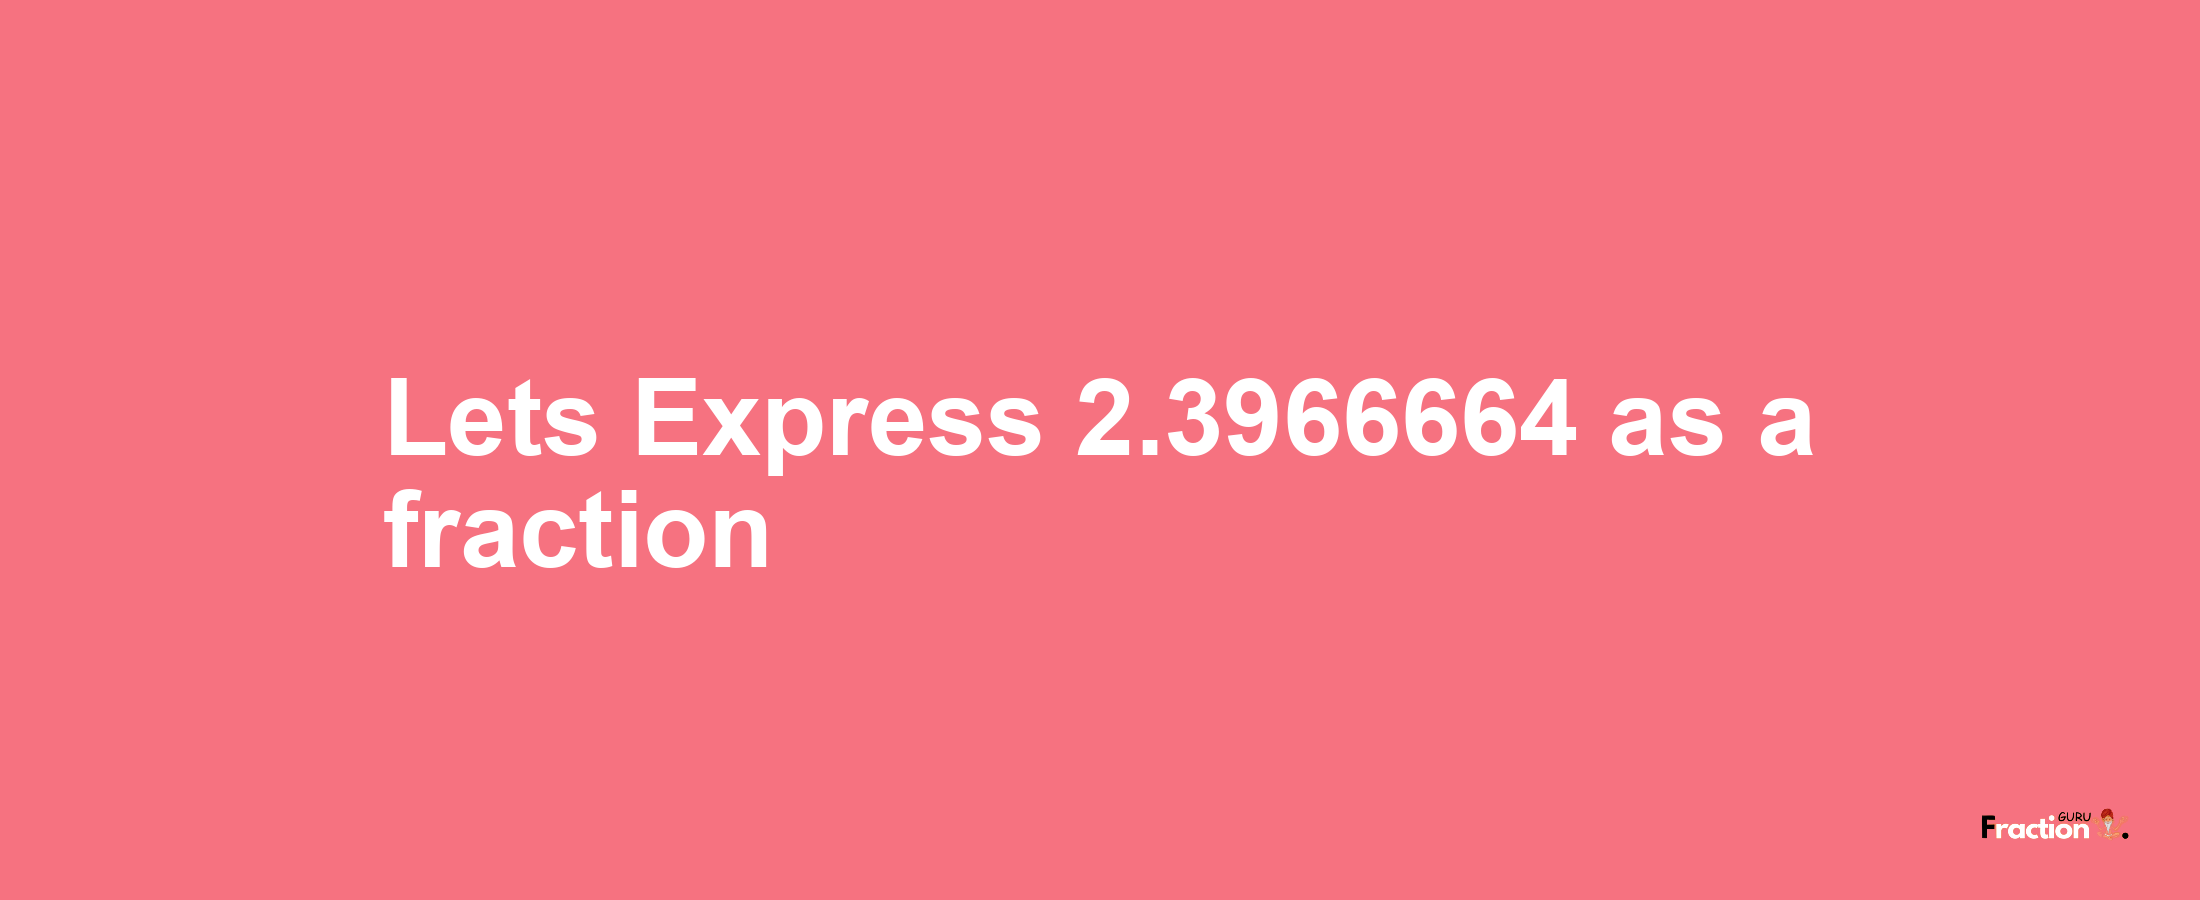 Lets Express 2.3966664 as afraction